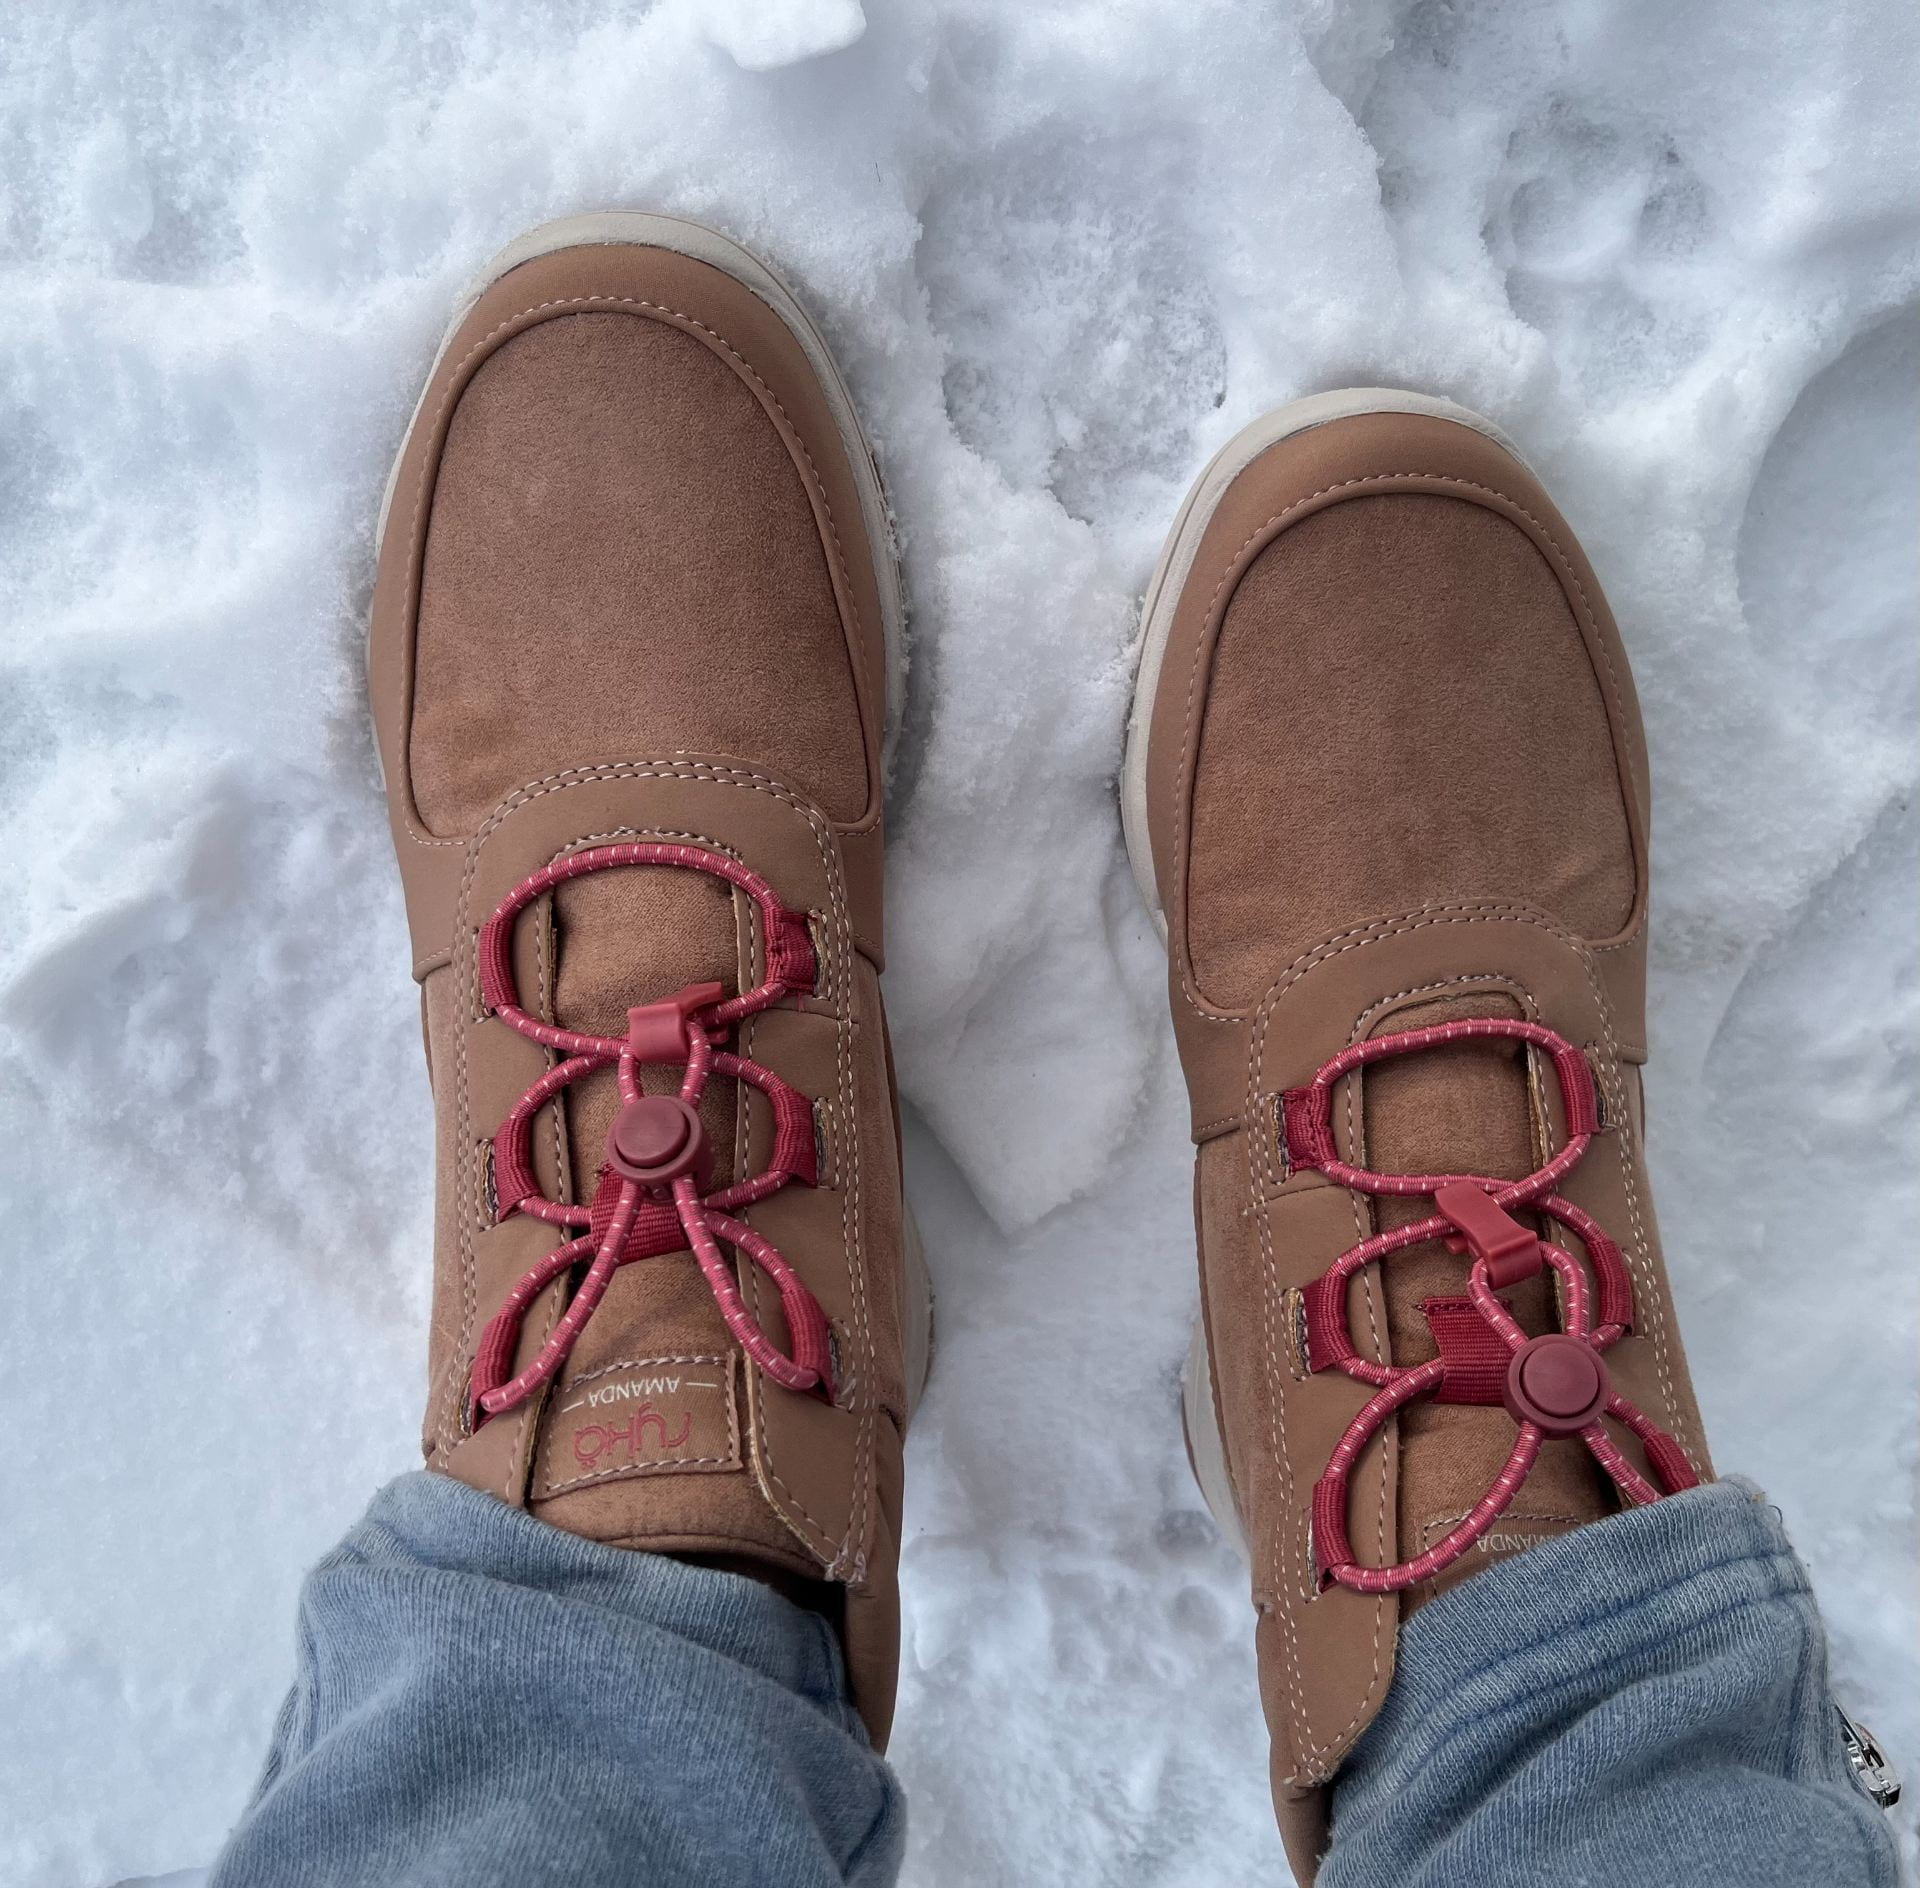 A pair of brown boots standing on snow